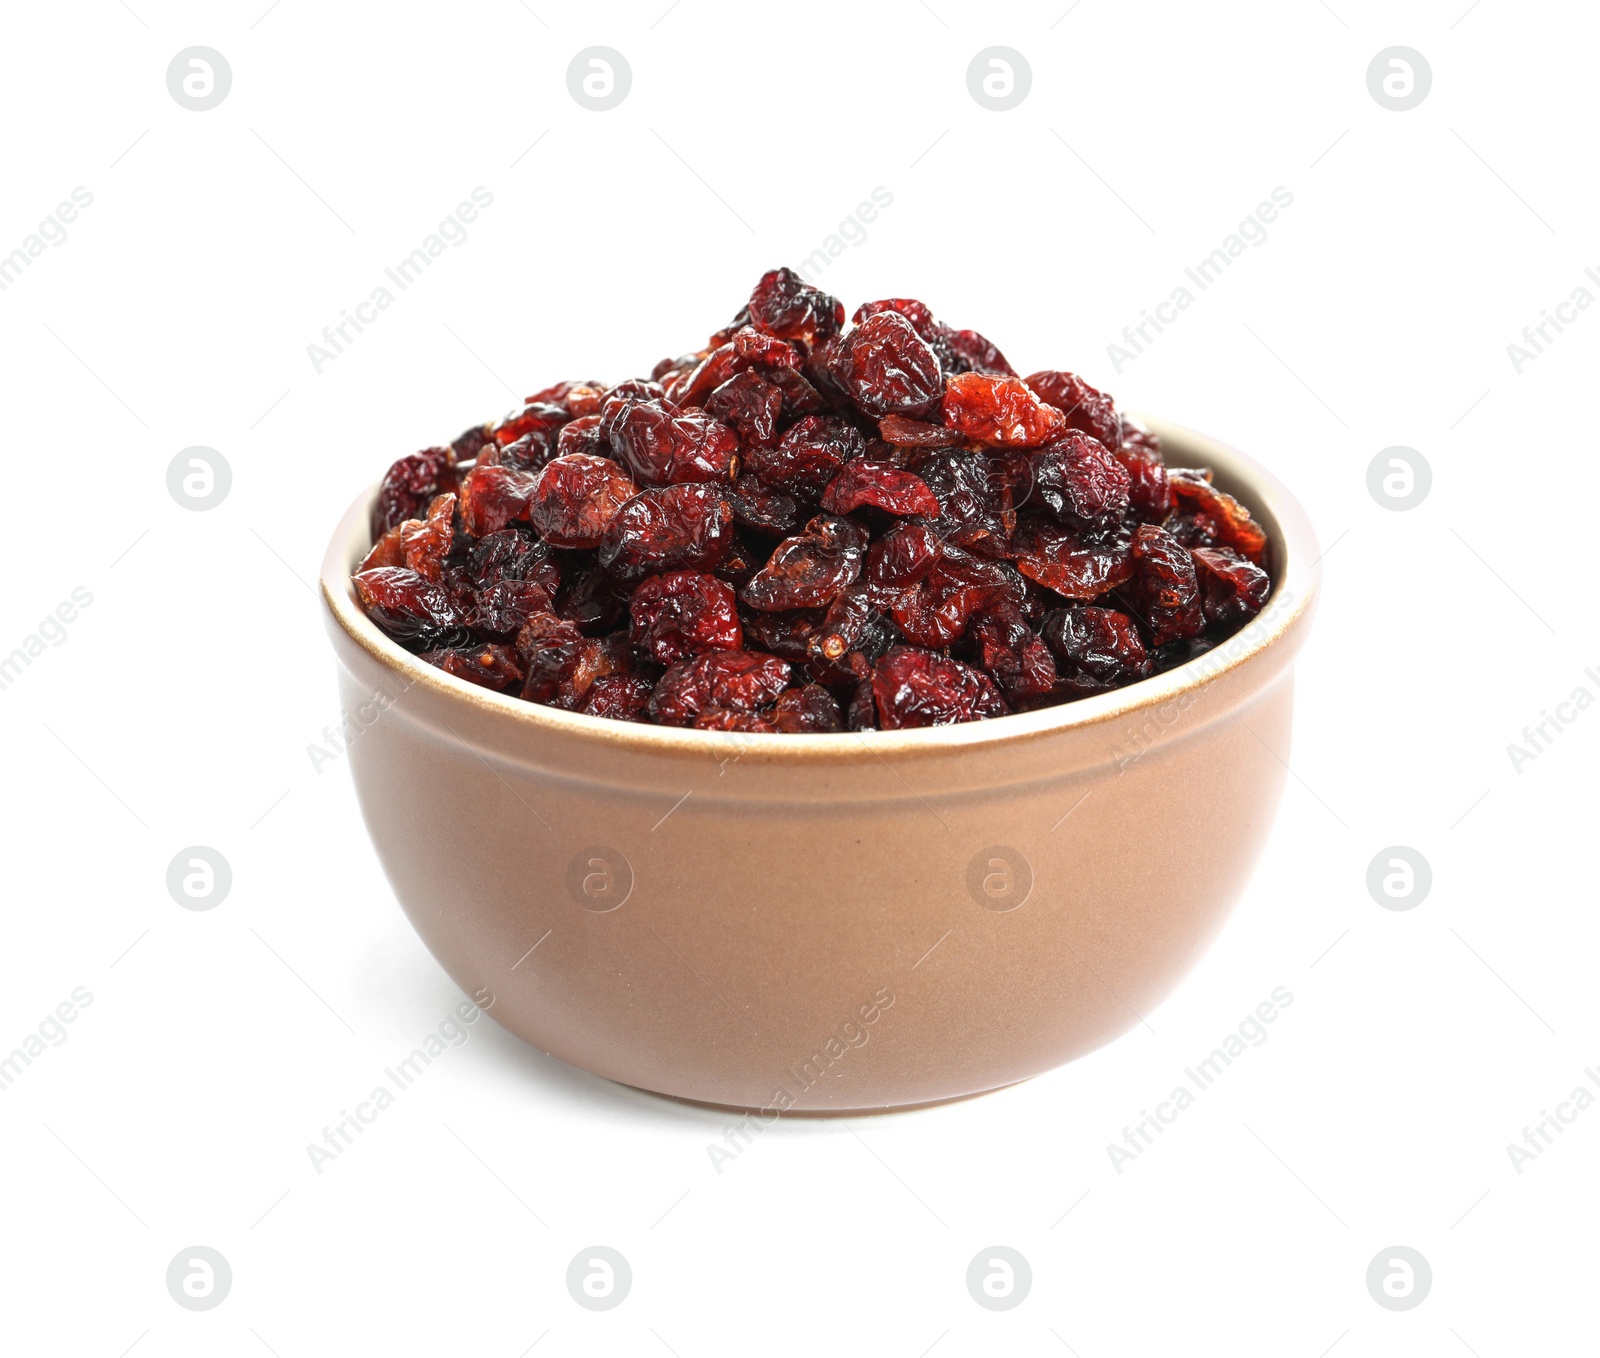 Photo of Bowl with cranberries on white background. Dried fruit as healthy snack